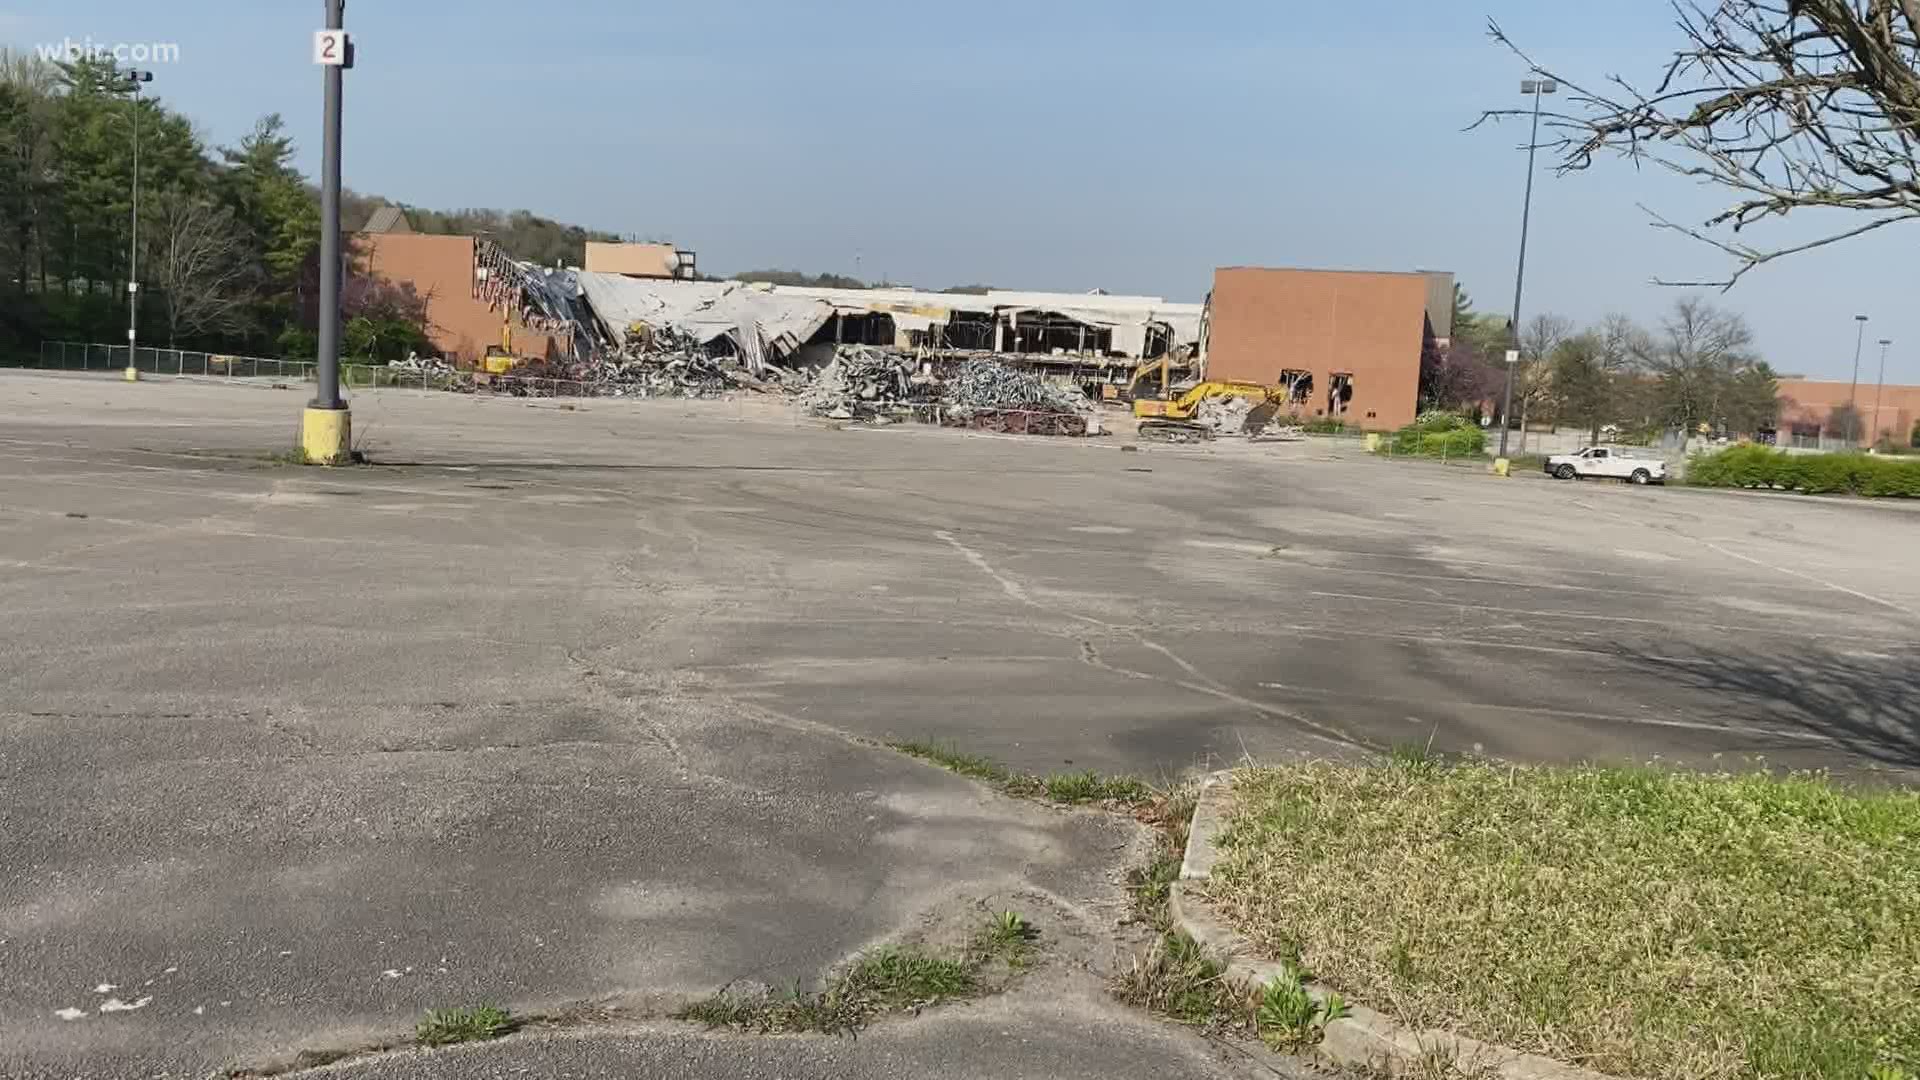 Demolition is underway at the former mall. It is set to become an Amazon delivery station.